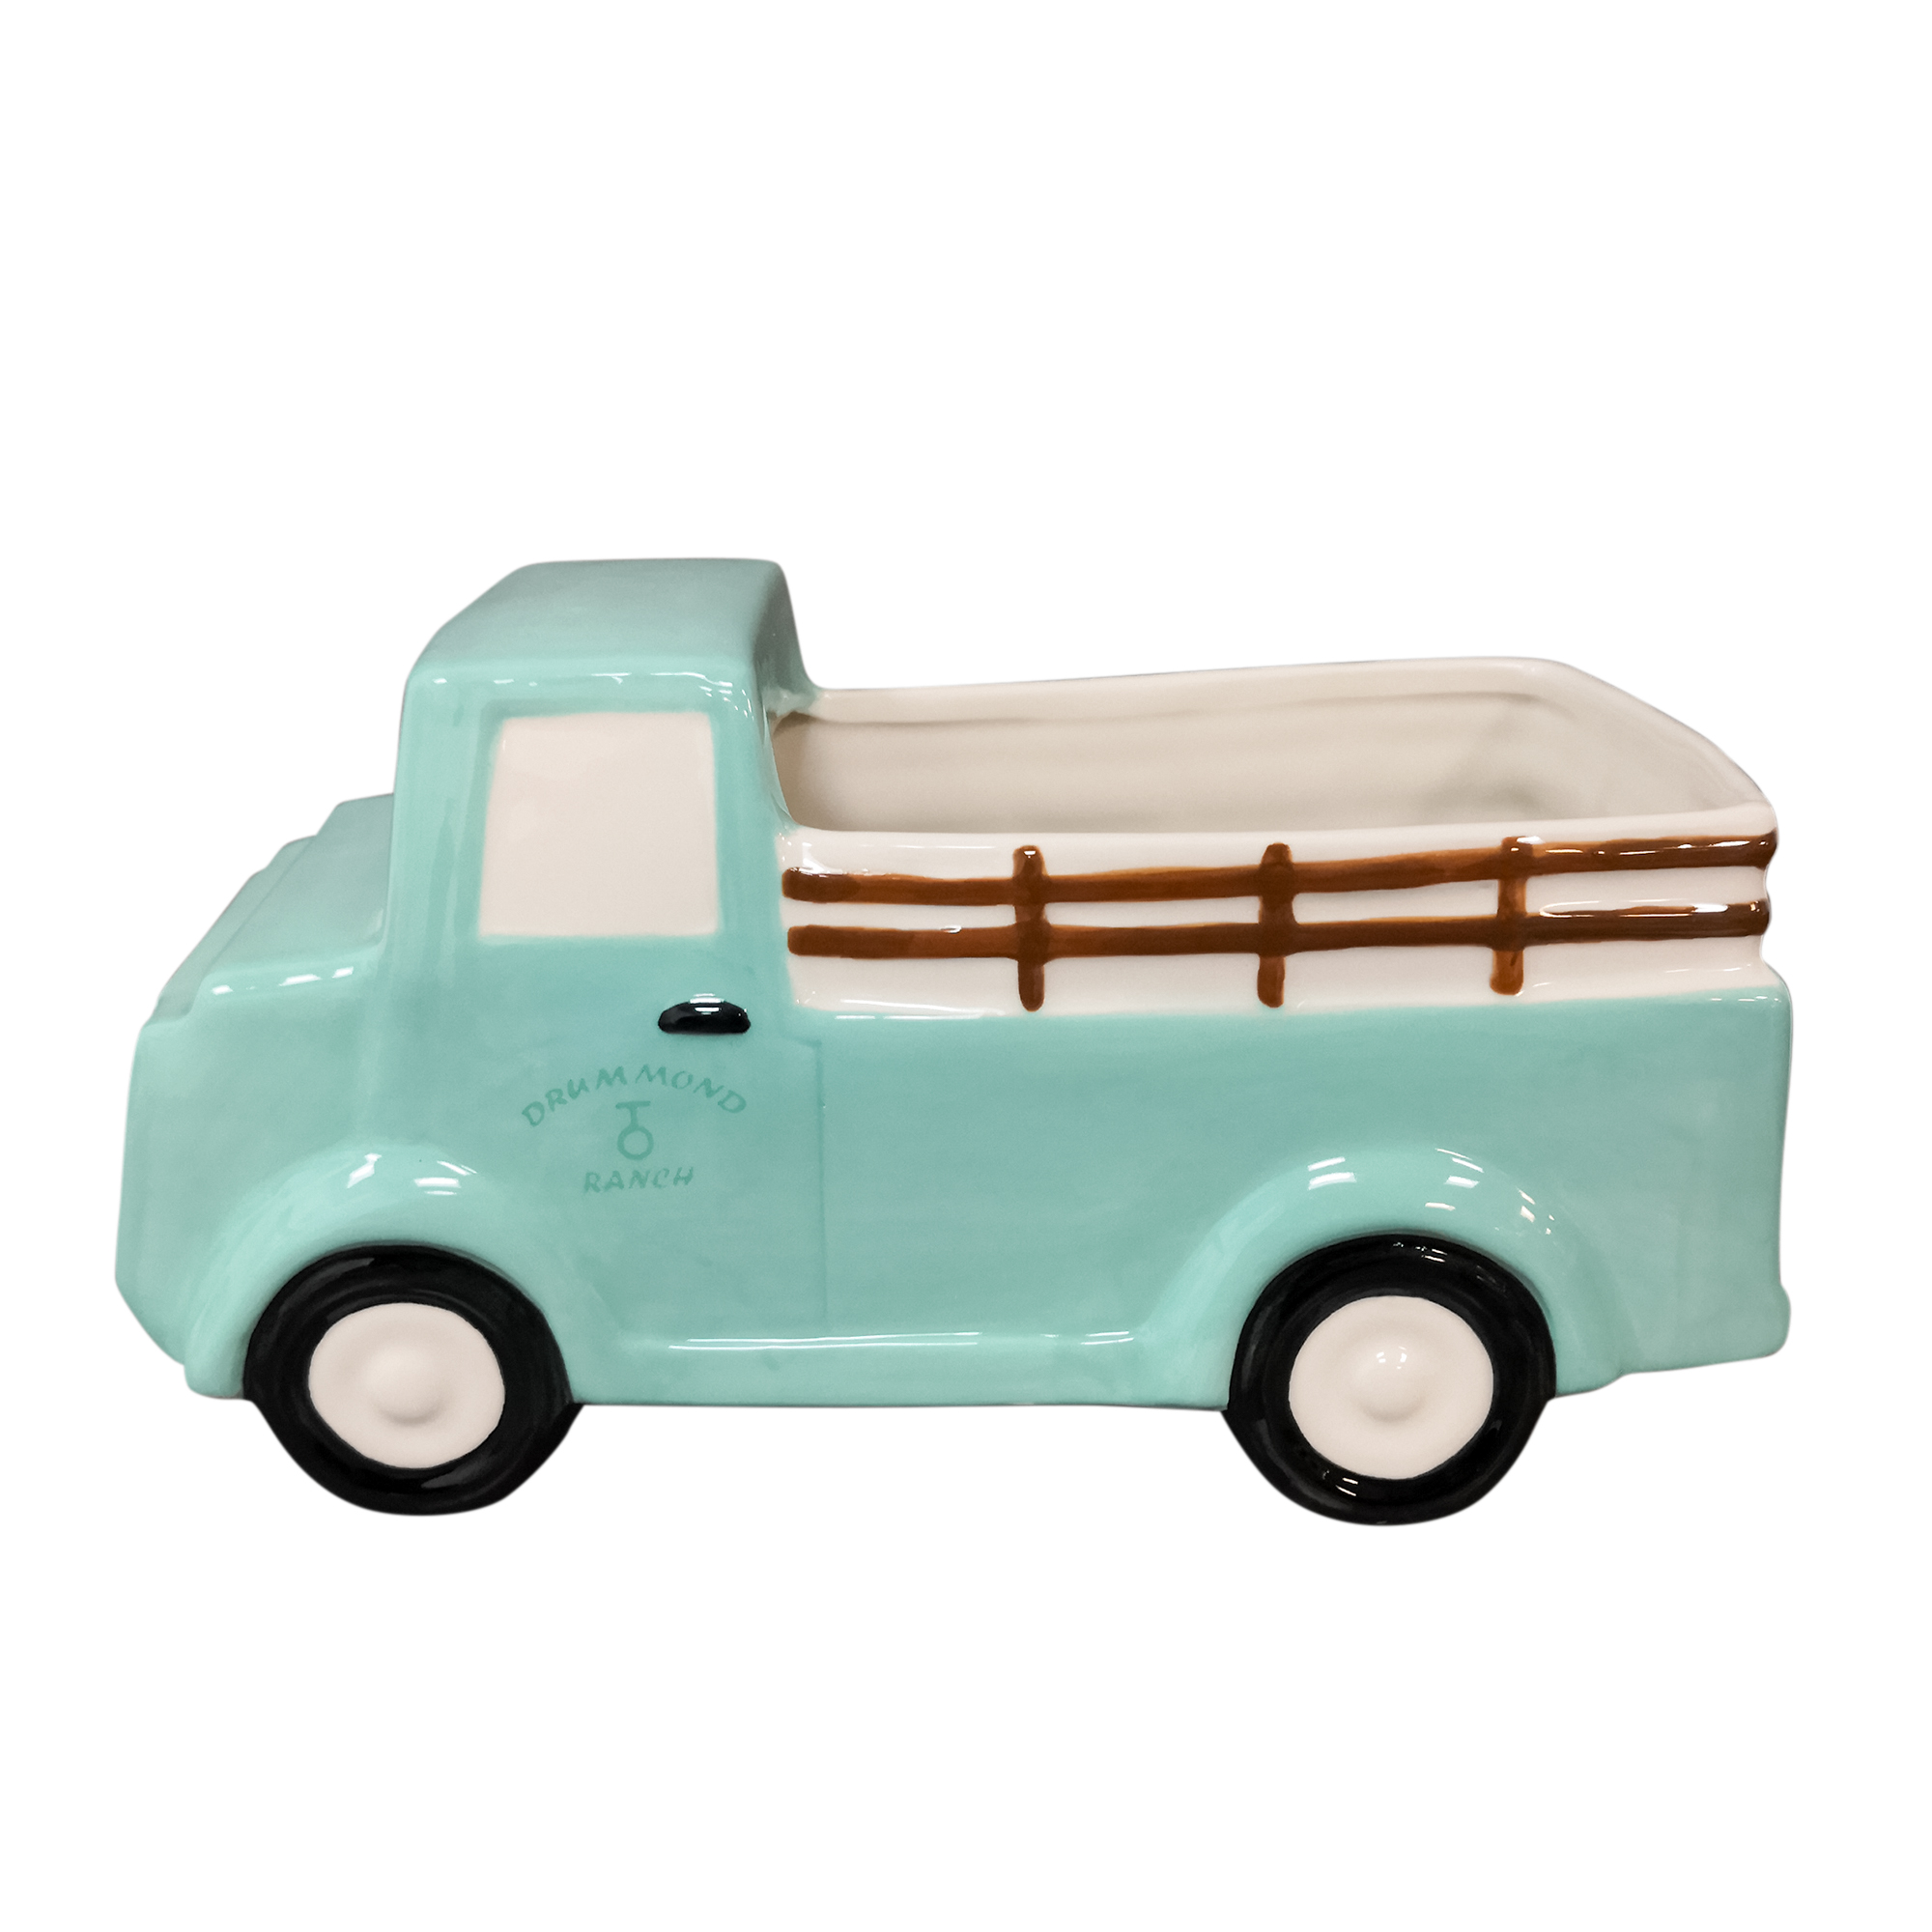 The Pioneer Woman Drummond Truck Novelty Planter 6 inch opening, Stoneware - image 4 of 5